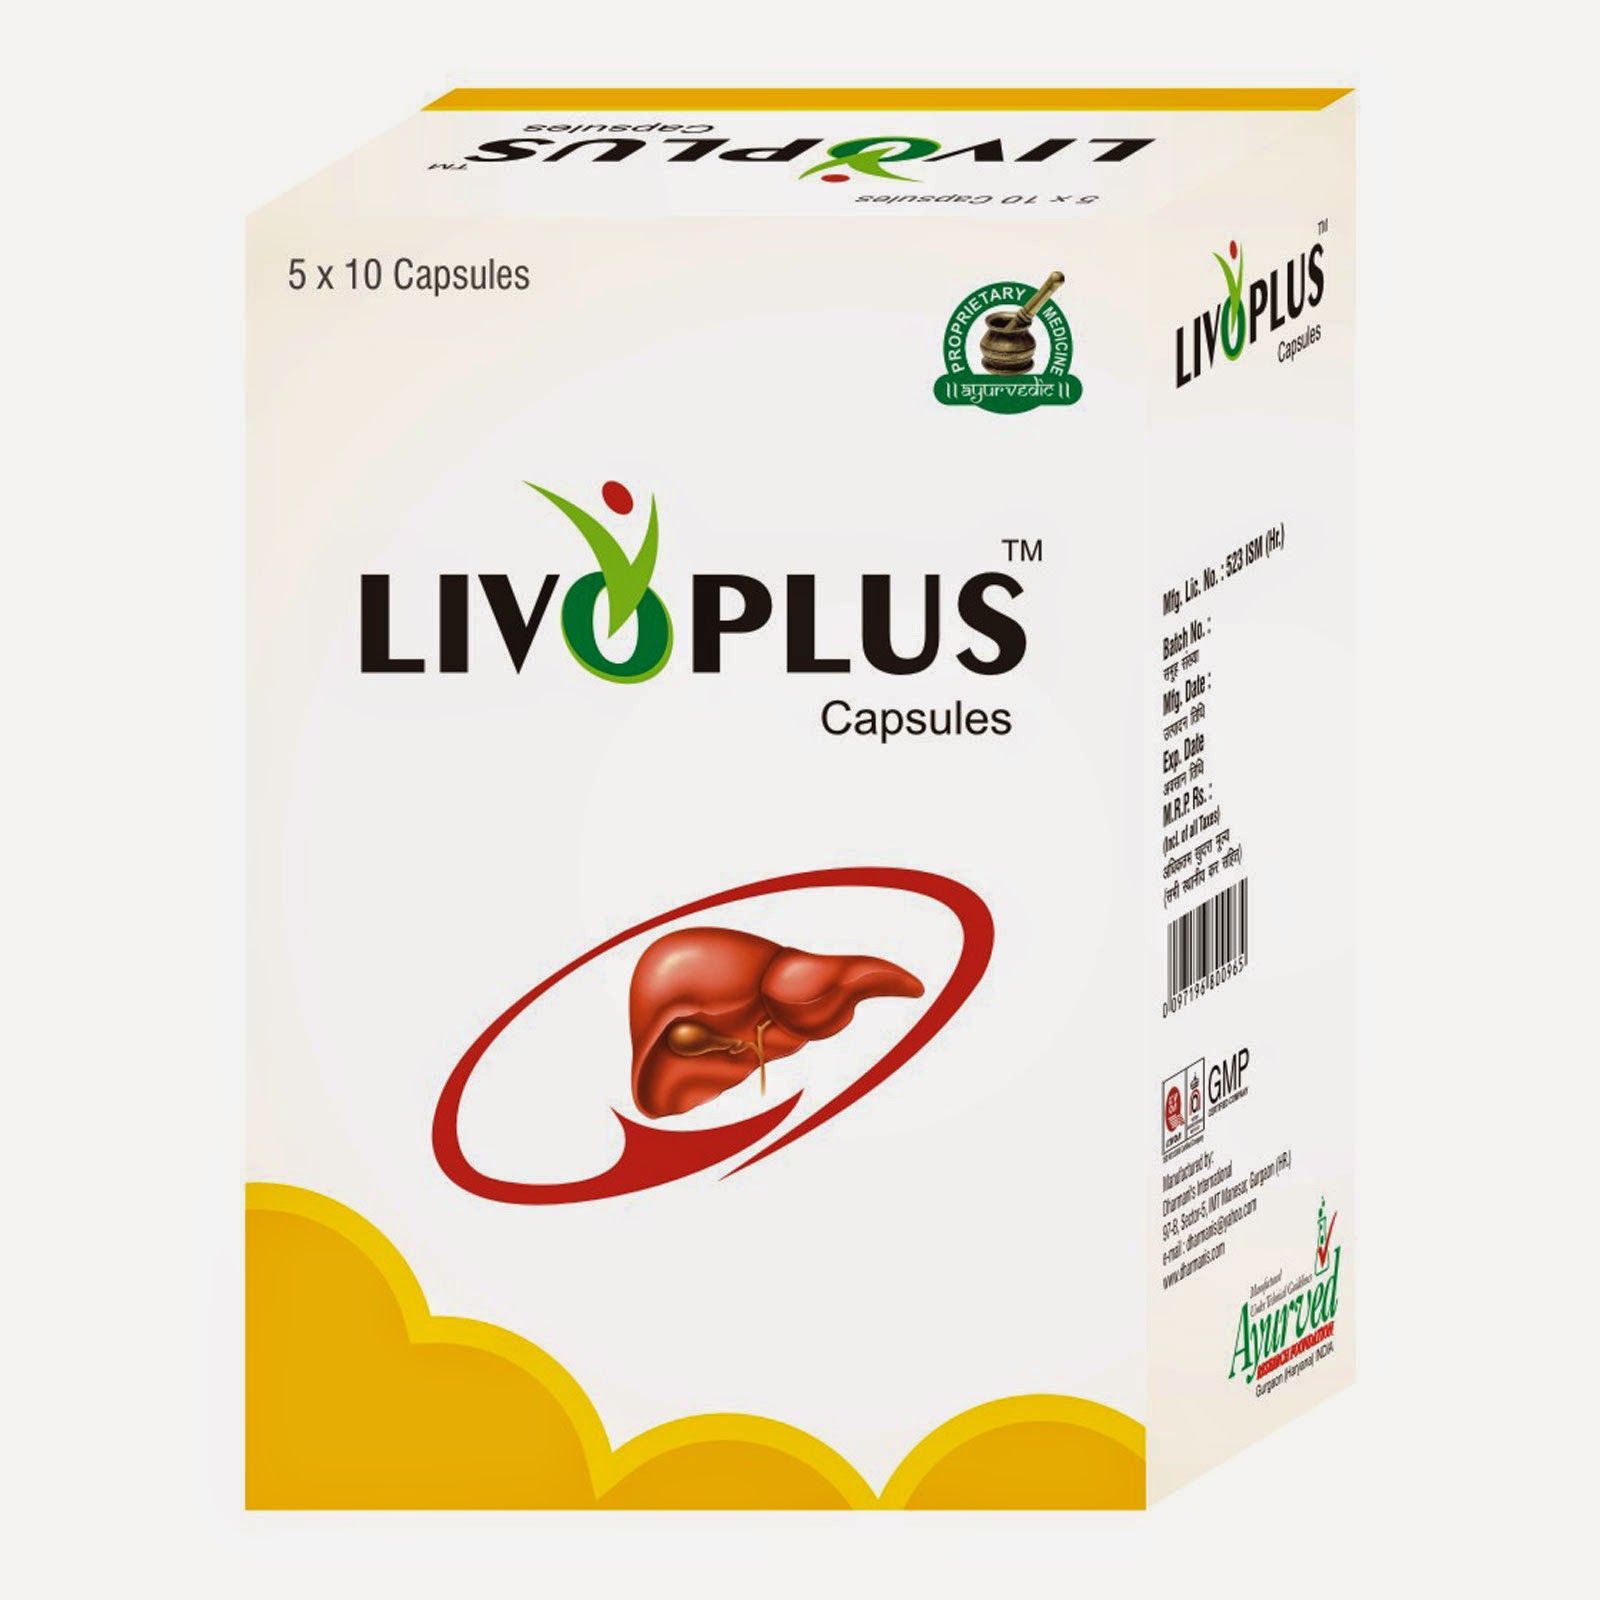 Liver Cleansing Products